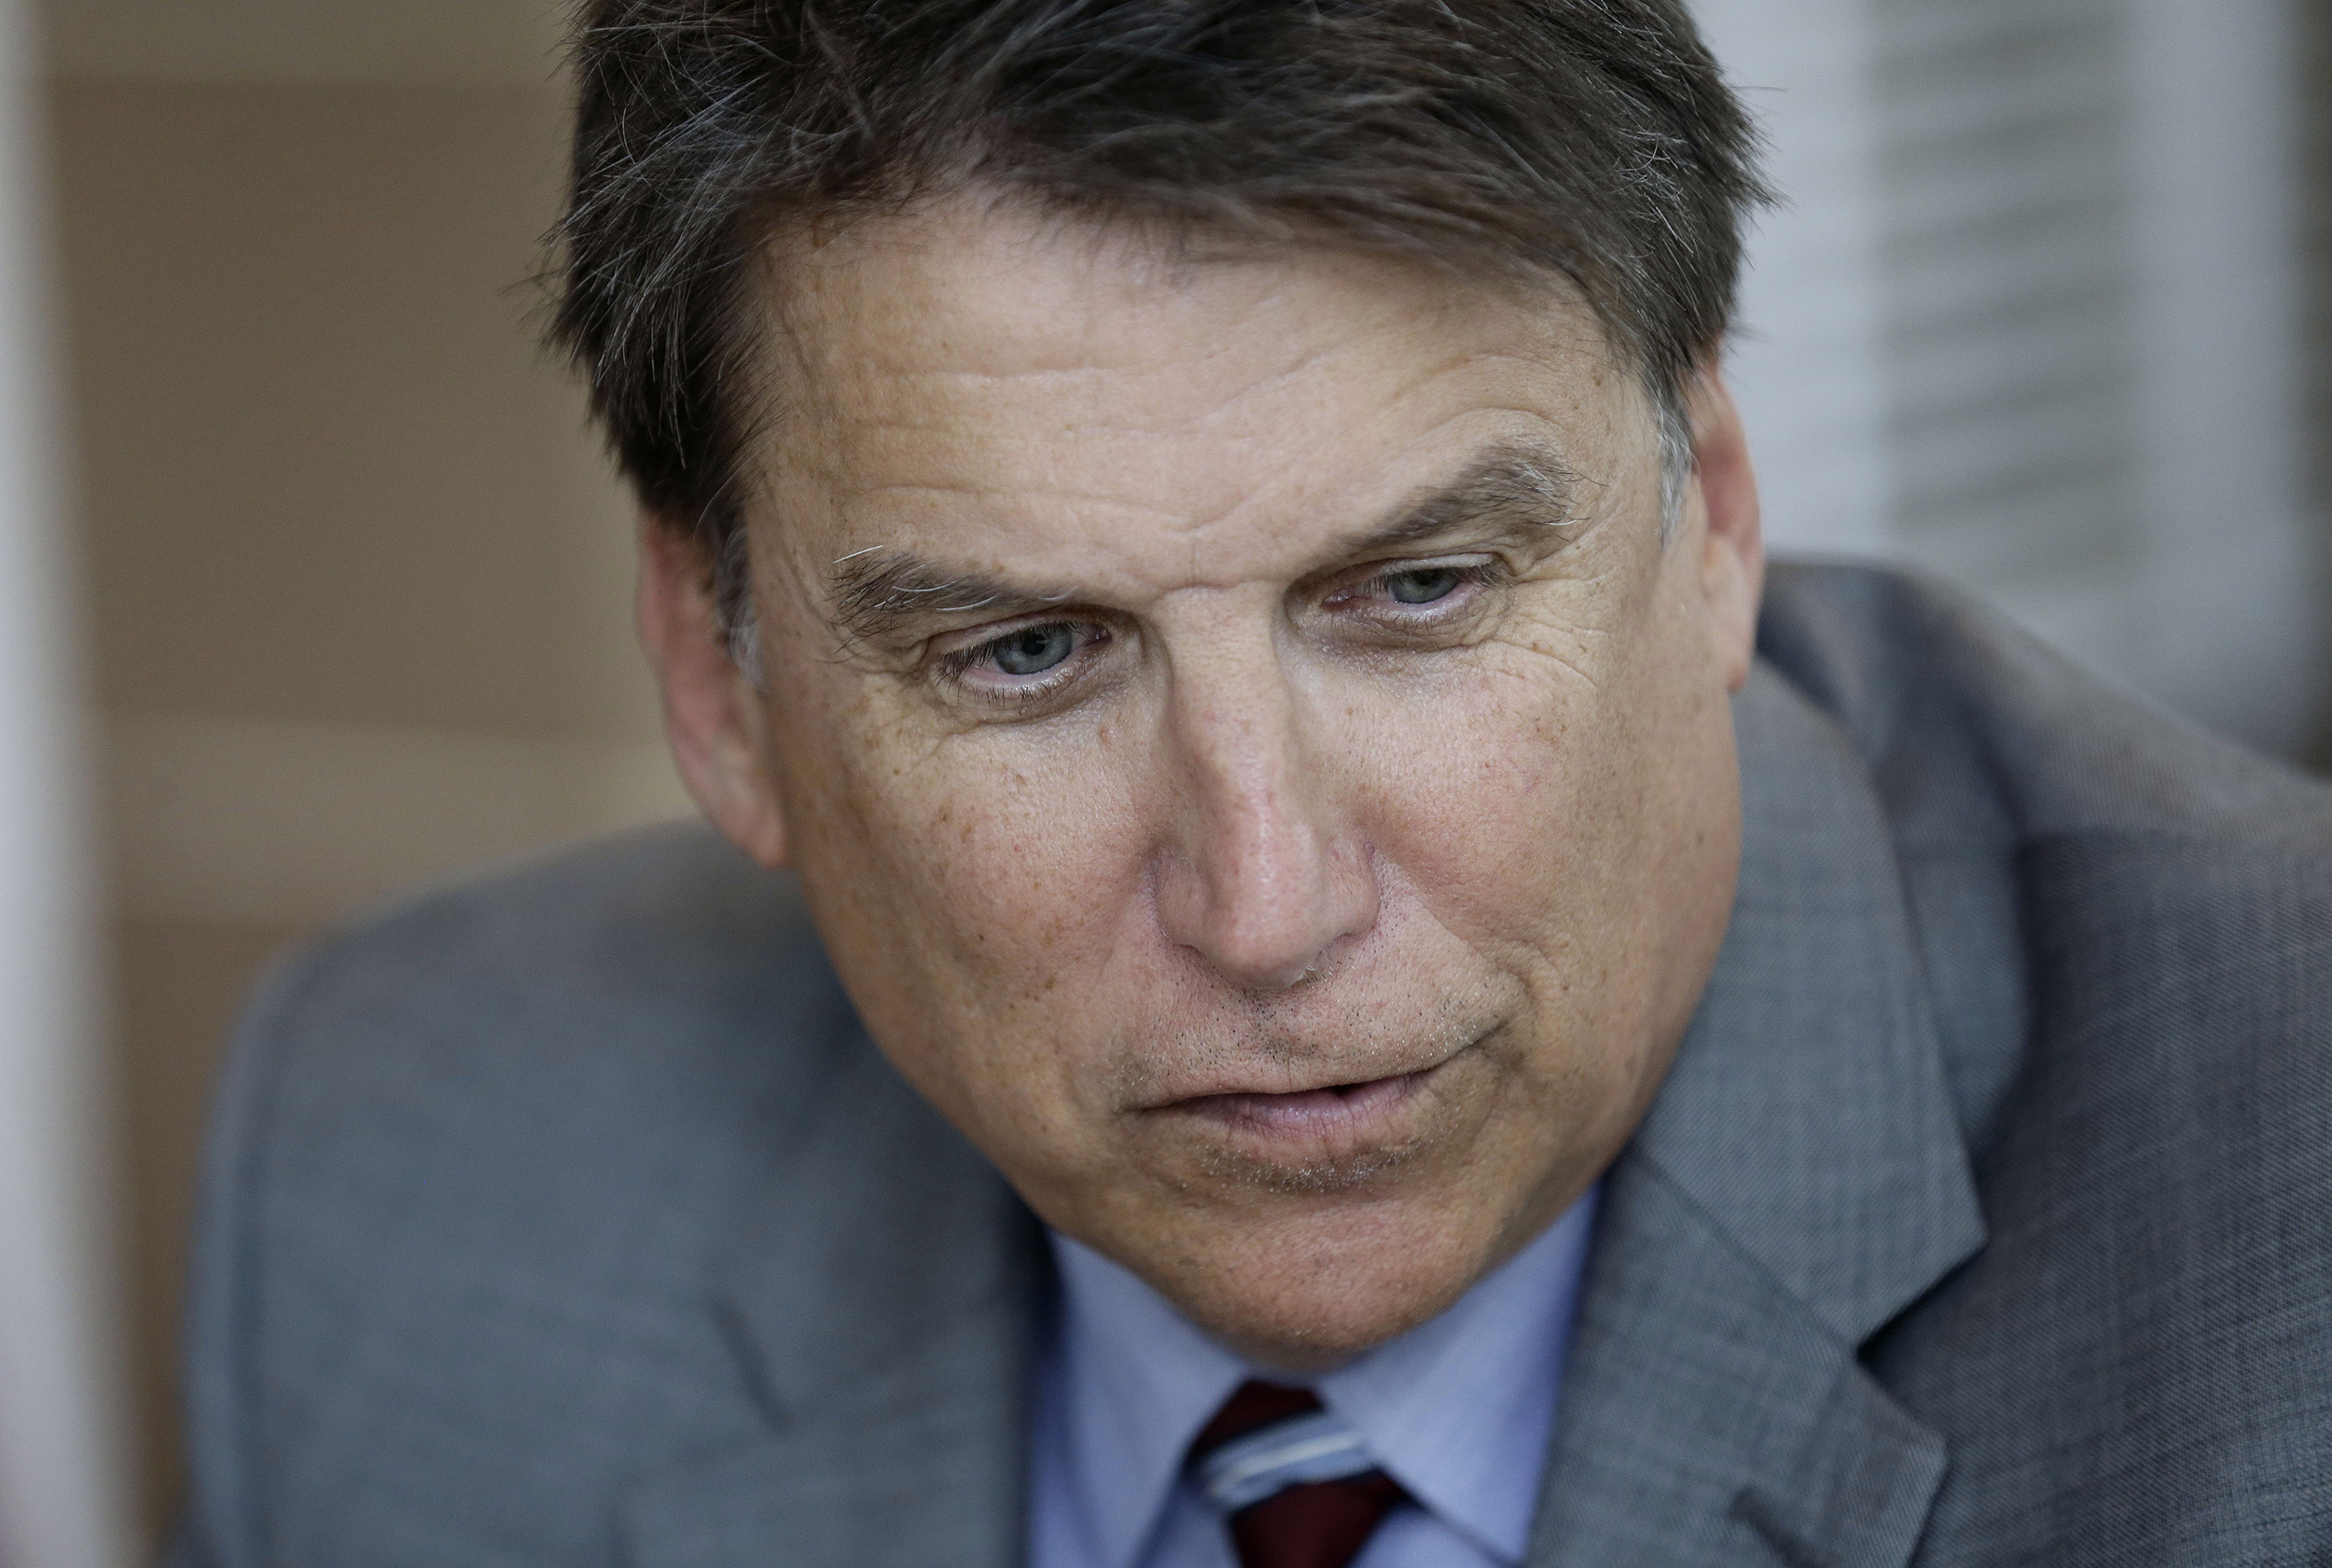 North Carolina Gov. Pat McCrory makes remarks during an interview at the Governor's mansion in Raleigh, N.C., on April 12, 2016. (Gerry Broome—AP)